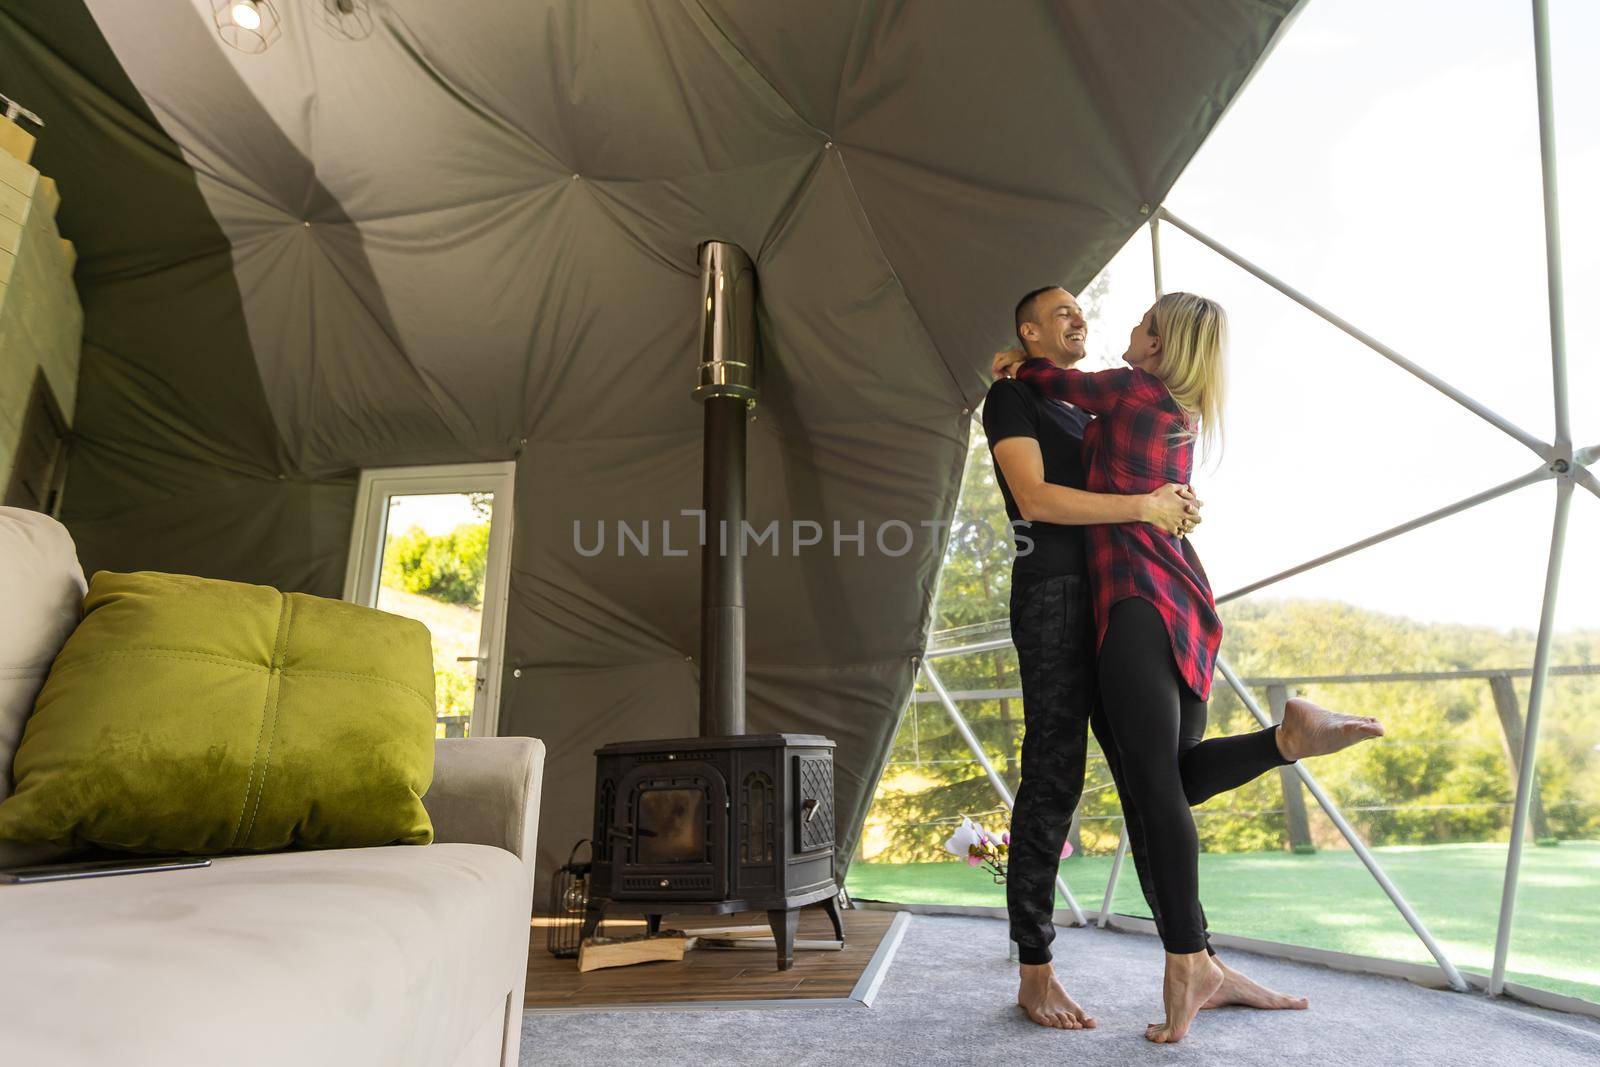 a couple in geo dome tents. Cozy, camping, glamping, holiday, vacation lifestyle concept. Outdoors cabin, scenic background. by Andelov13